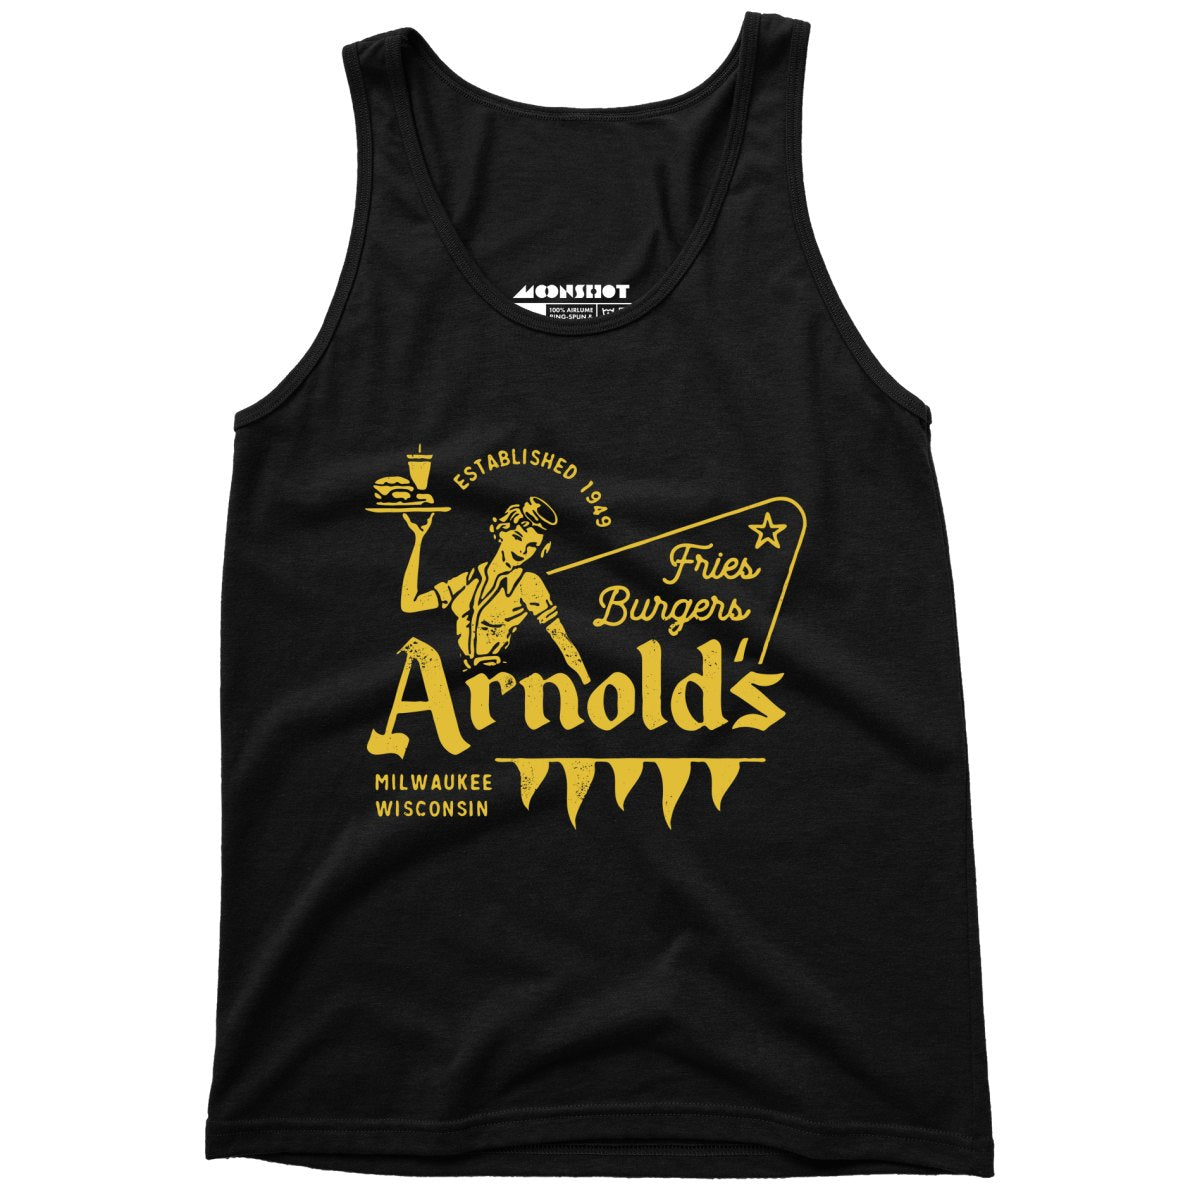 Arnold's Drive-In Happy Days - Unisex Tank Top